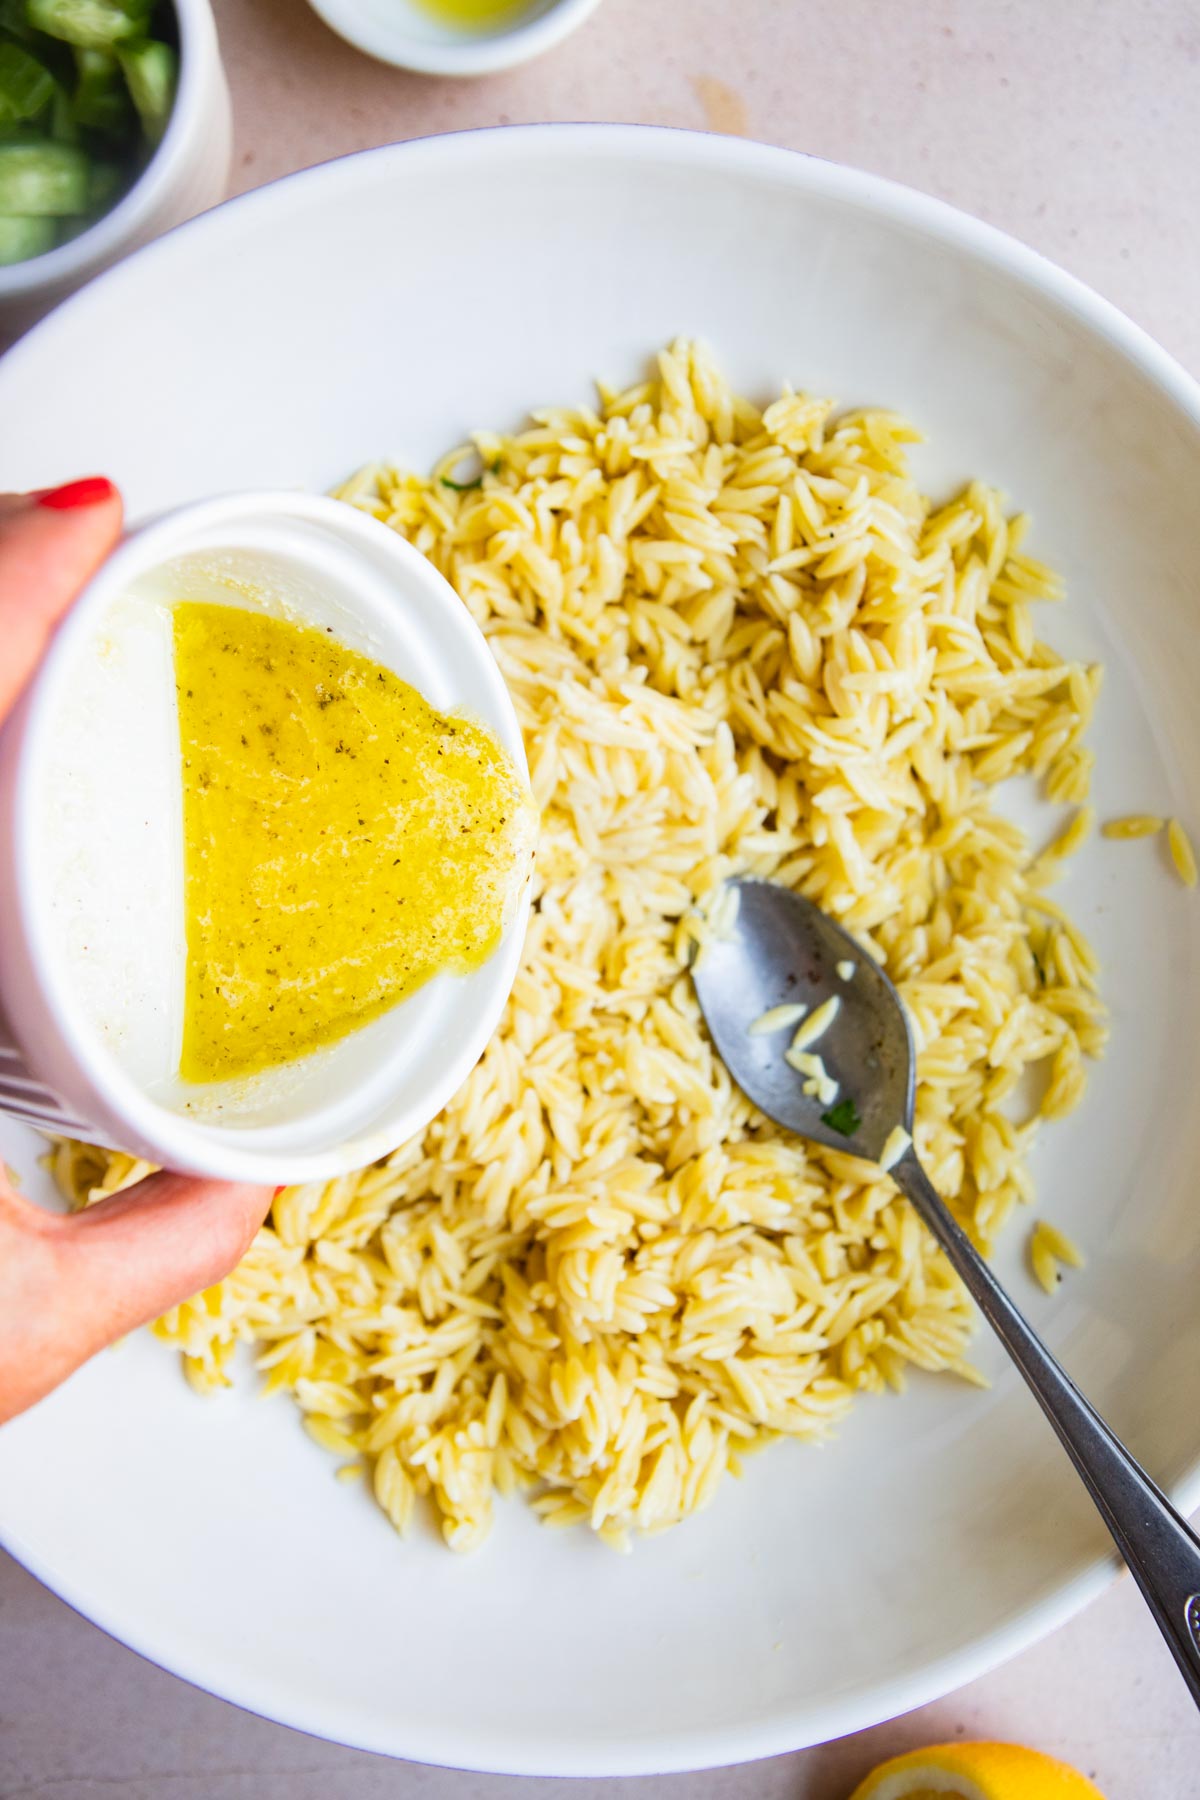 Hand pouring lemon parmesan dressing over a bowl of cooked orzo pasta.